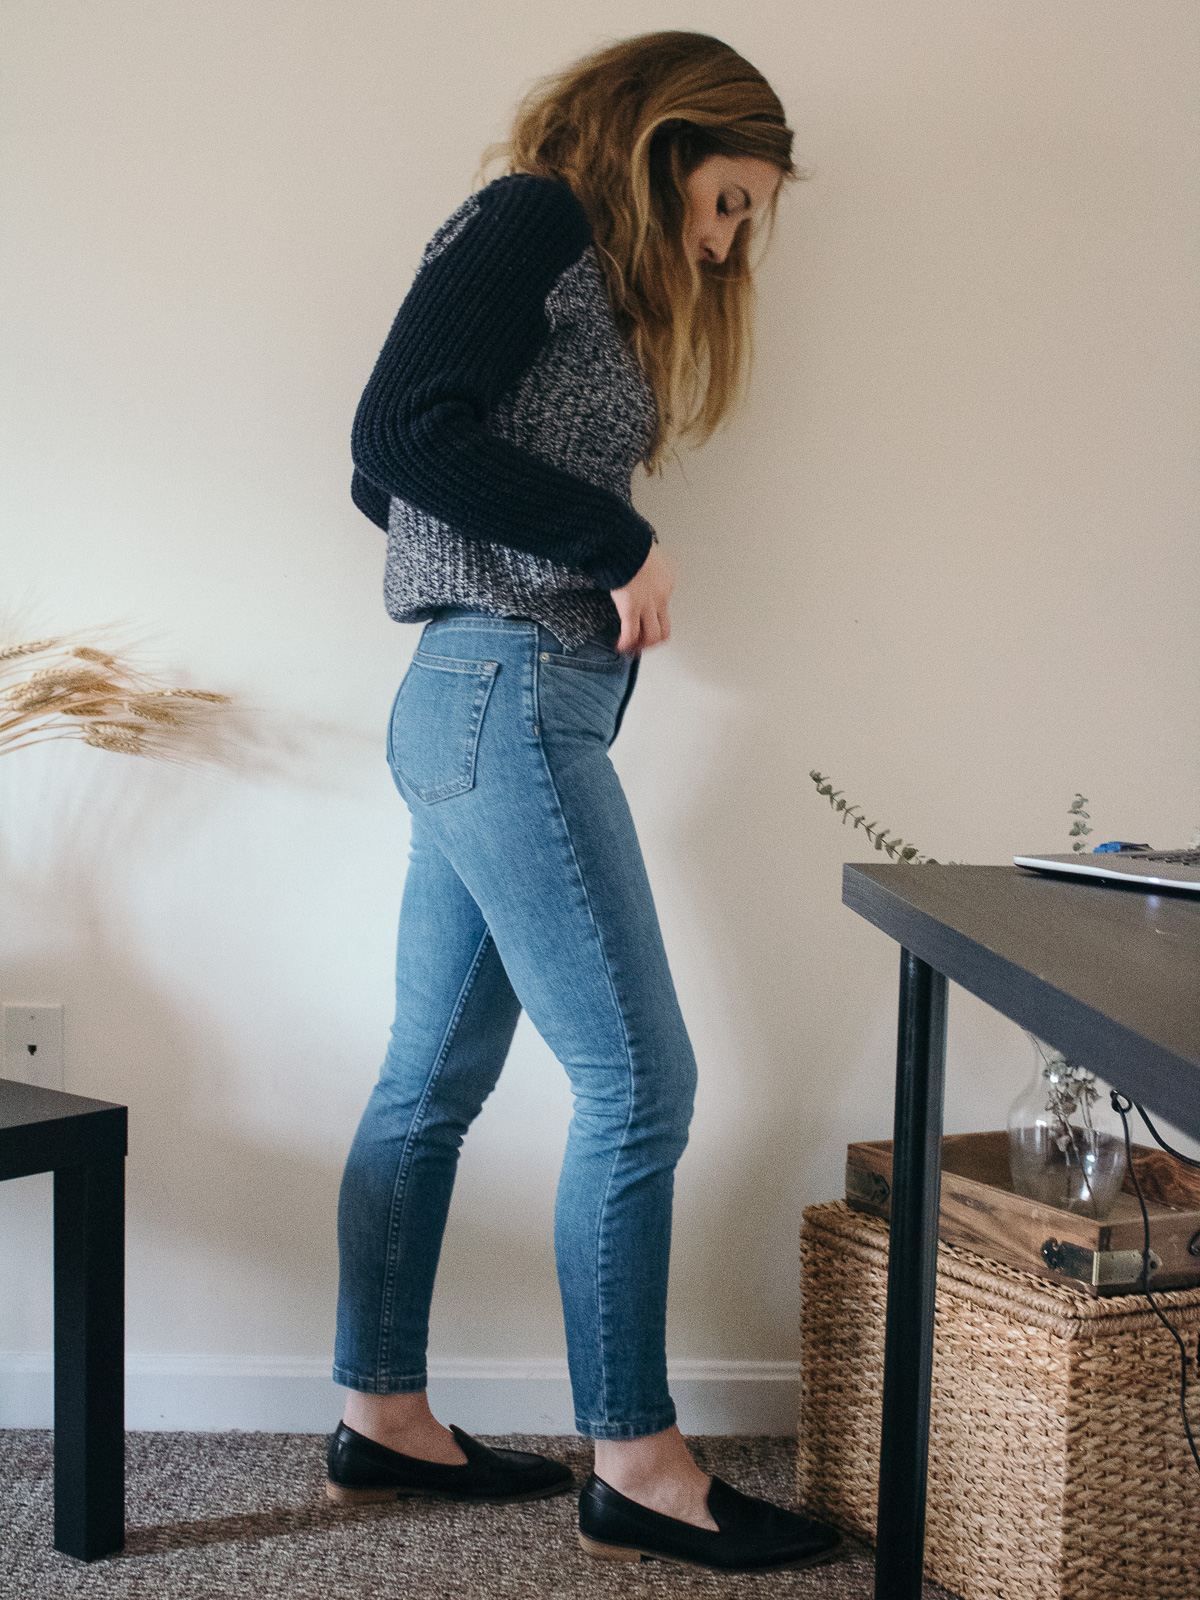 The Lavender Daily - Everlane Jeans Review